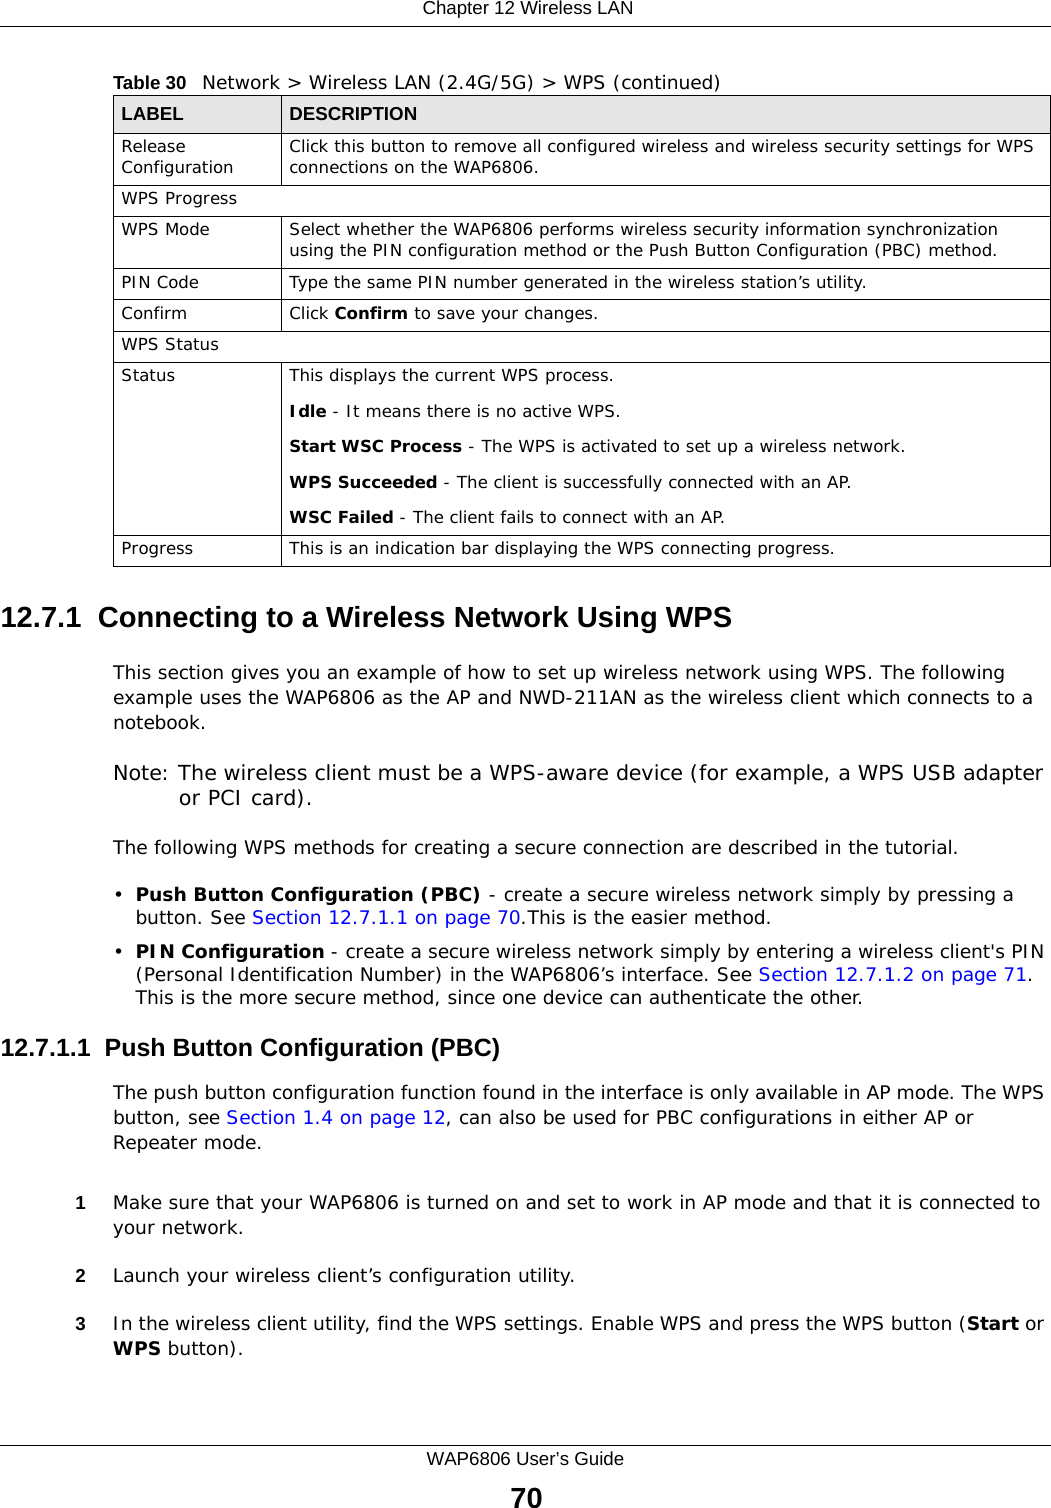  Chapter 12 Wireless LANWAP6806 User’s Guide7012.7.1  Connecting to a Wireless Network Using WPSThis section gives you an example of how to set up wireless network using WPS. The following example uses the WAP6806 as the AP and NWD-211AN as the wireless client which connects to a notebook. Note: The wireless client must be a WPS-aware device (for example, a WPS USB adapter or PCI card).The following WPS methods for creating a secure connection are described in the tutorial.•Push Button Configuration (PBC) - create a secure wireless network simply by pressing a button. See Section 12.7.1.1 on page 70.This is the easier method.•PIN Configuration - create a secure wireless network simply by entering a wireless client&apos;s PIN (Personal Identification Number) in the WAP6806’s interface. See Section 12.7.1.2 on page 71. This is the more secure method, since one device can authenticate the other.12.7.1.1  Push Button Configuration (PBC)The push button configuration function found in the interface is only available in AP mode. The WPS button, see Section 1.4 on page 12, can also be used for PBC configurations in either AP or Repeater mode.1Make sure that your WAP6806 is turned on and set to work in AP mode and that it is connected to your network. 2Launch your wireless client’s configuration utility. 3In the wireless client utility, find the WPS settings. Enable WPS and press the WPS button (Start or WPS button). Release Configuration Click this button to remove all configured wireless and wireless security settings for WPS connections on the WAP6806.WPS ProgressWPS Mode Select whether the WAP6806 performs wireless security information synchronization using the PIN configuration method or the Push Button Configuration (PBC) method.PIN Code Type the same PIN number generated in the wireless station’s utility.Confirm Click Confirm to save your changes.WPS StatusStatus This displays the current WPS process.Idle - It means there is no active WPS.Start WSC Process - The WPS is activated to set up a wireless network.WPS Succeeded - The client is successfully connected with an AP.WSC Failed - The client fails to connect with an AP.Progress This is an indication bar displaying the WPS connecting progress. Table 30   Network &gt; Wireless LAN (2.4G/5G) &gt; WPS (continued)LABEL  DESCRIPTION